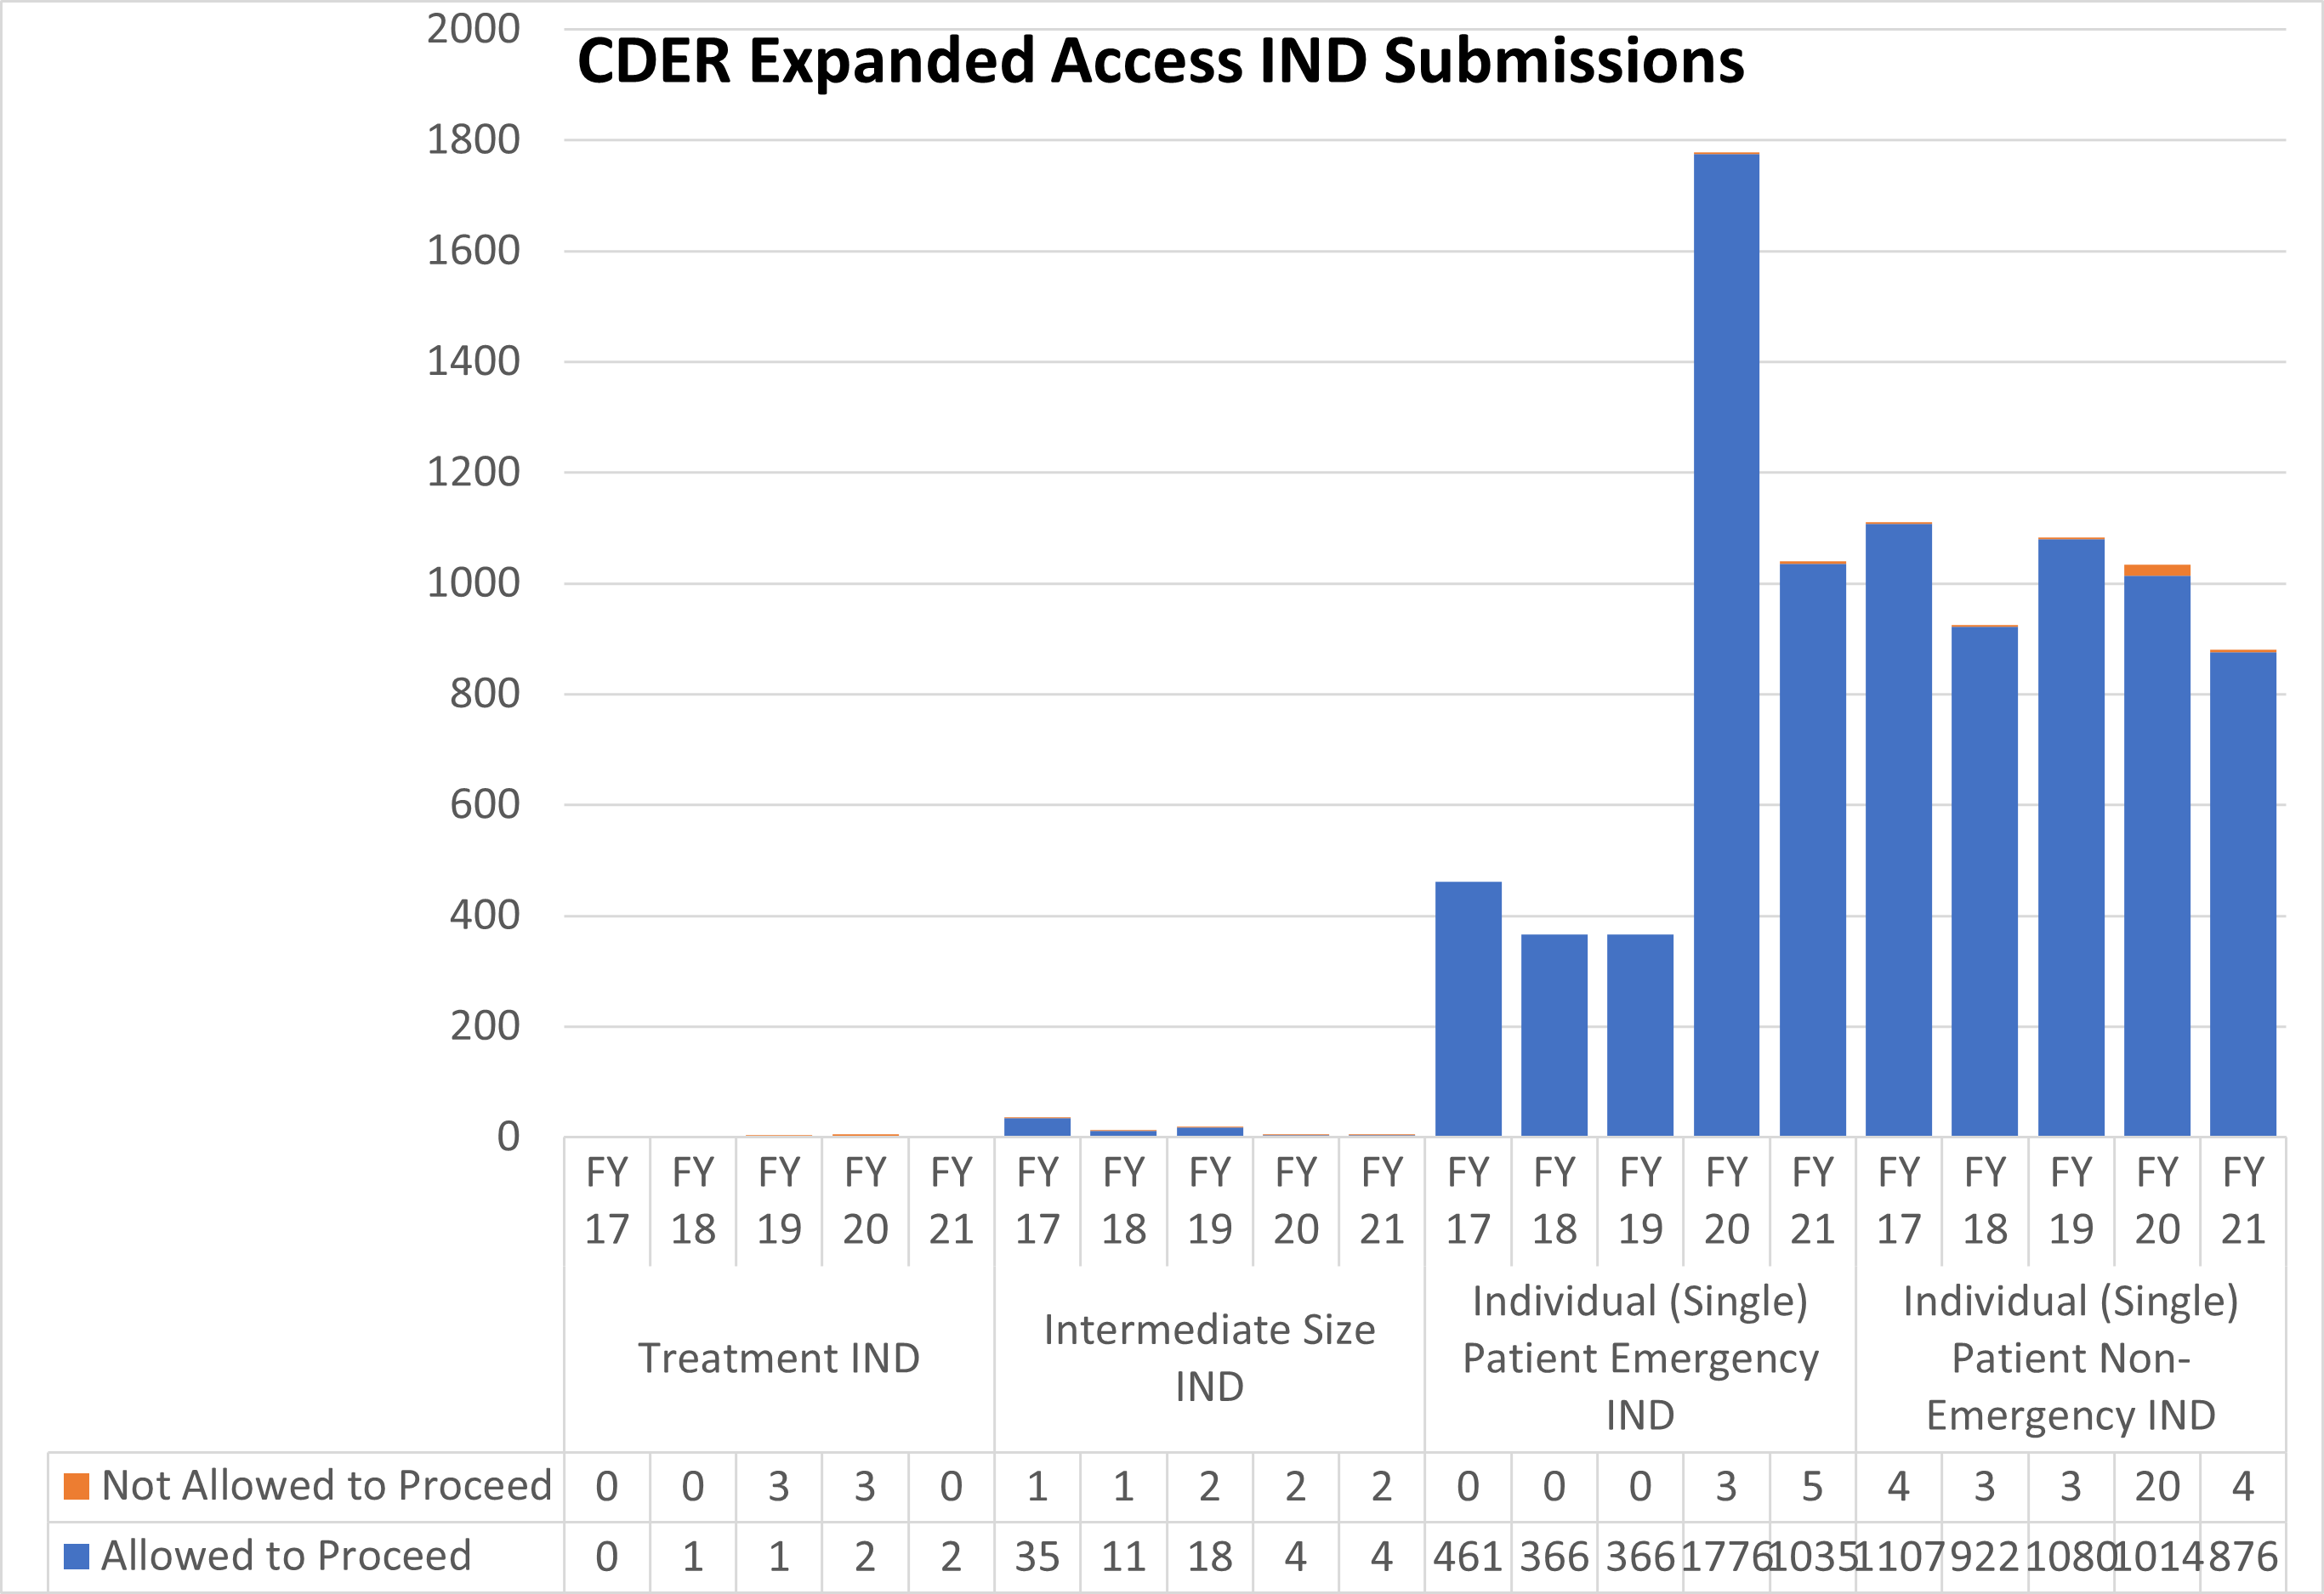 CDER Expanded Access INDs and Protocol (2017-2021)